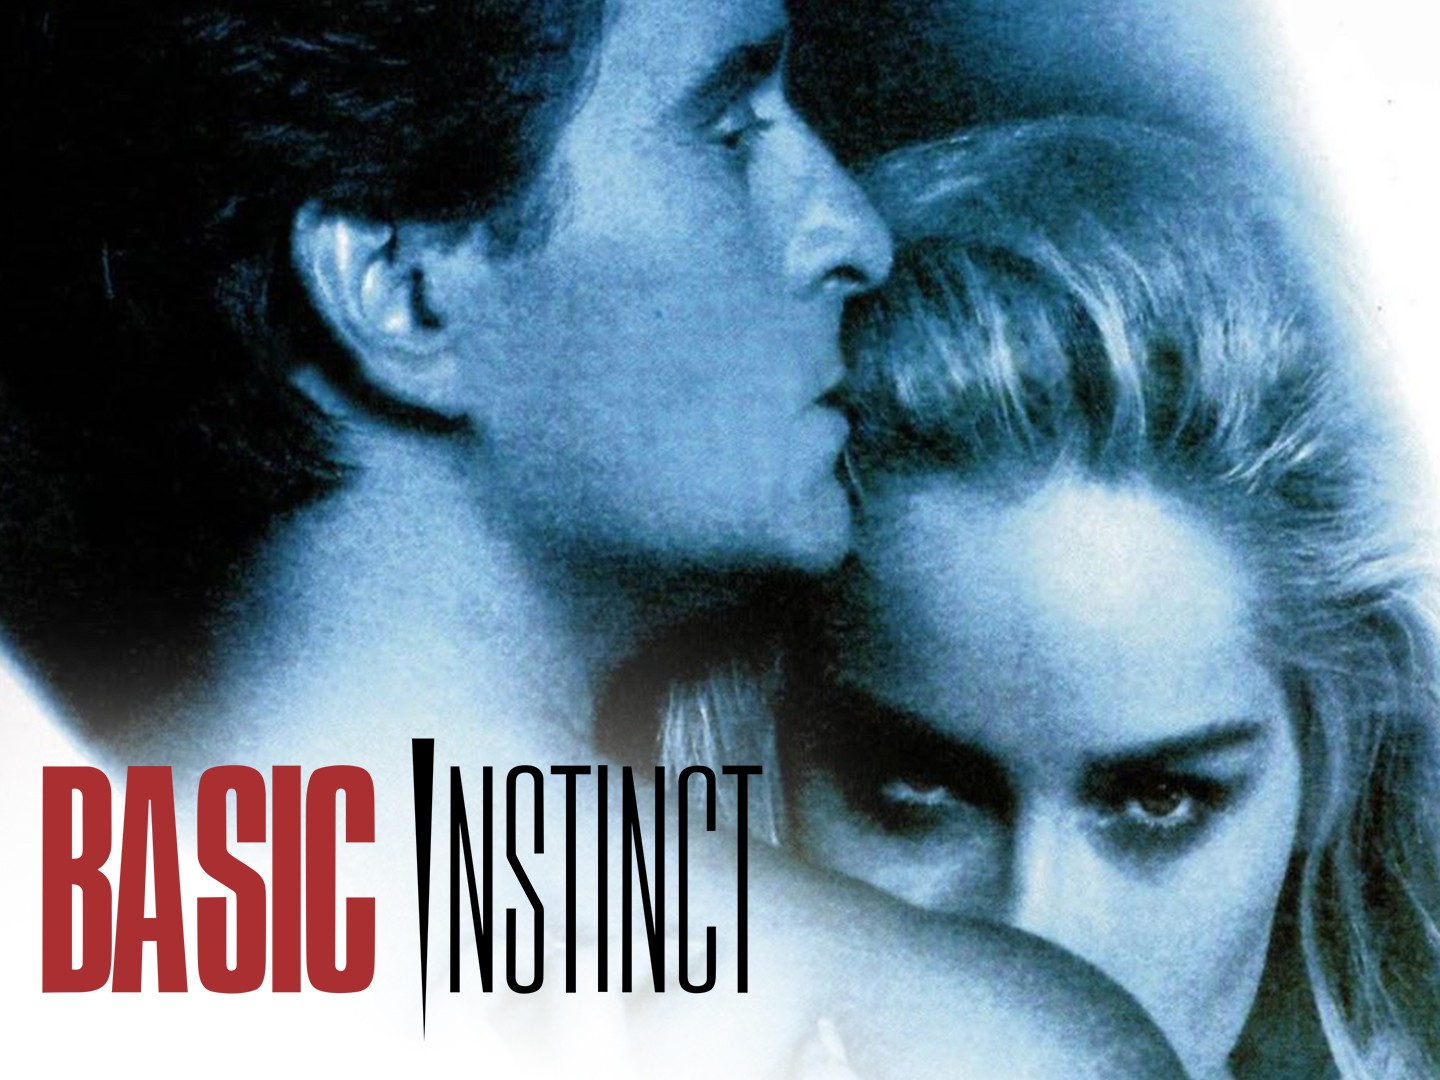 15 Thrilling Facts About 'Basic Instinct